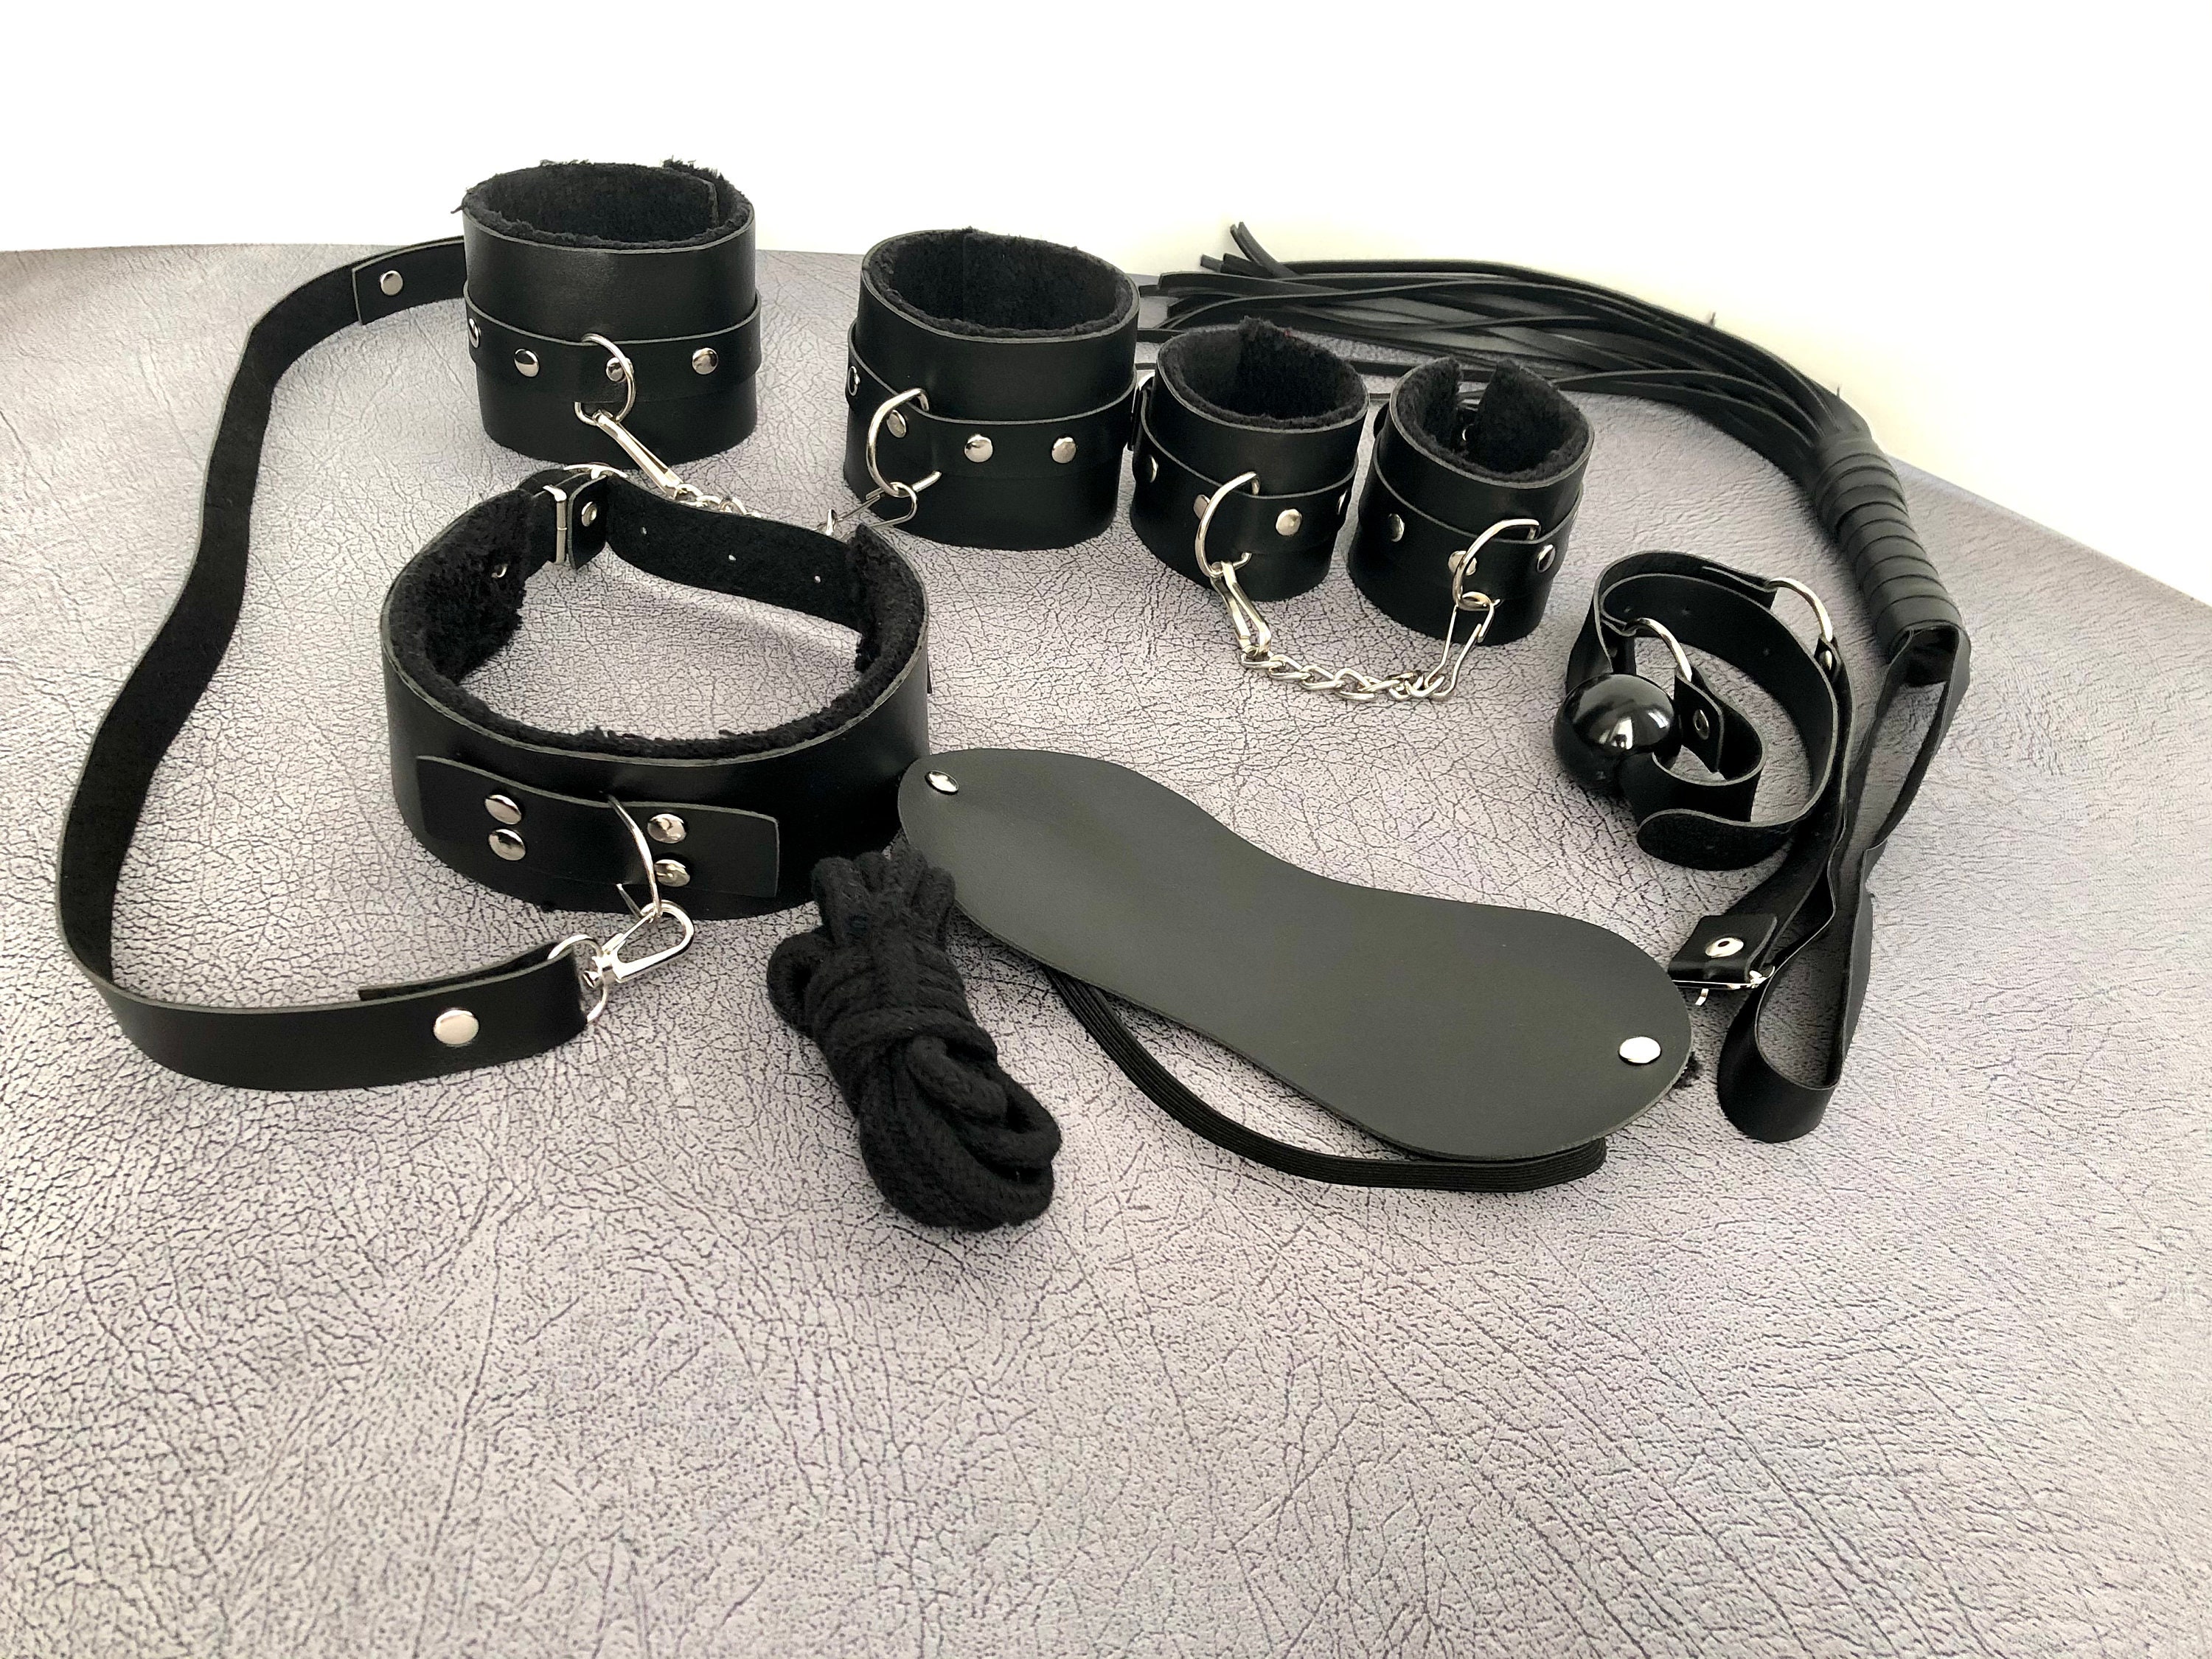 7 Pieces Bondage Kit Beginners BDSM Set Includes Handcuffs, Gag, Choker,  Mask, Rope, Leash, Whip, Master Submissive Daddy 